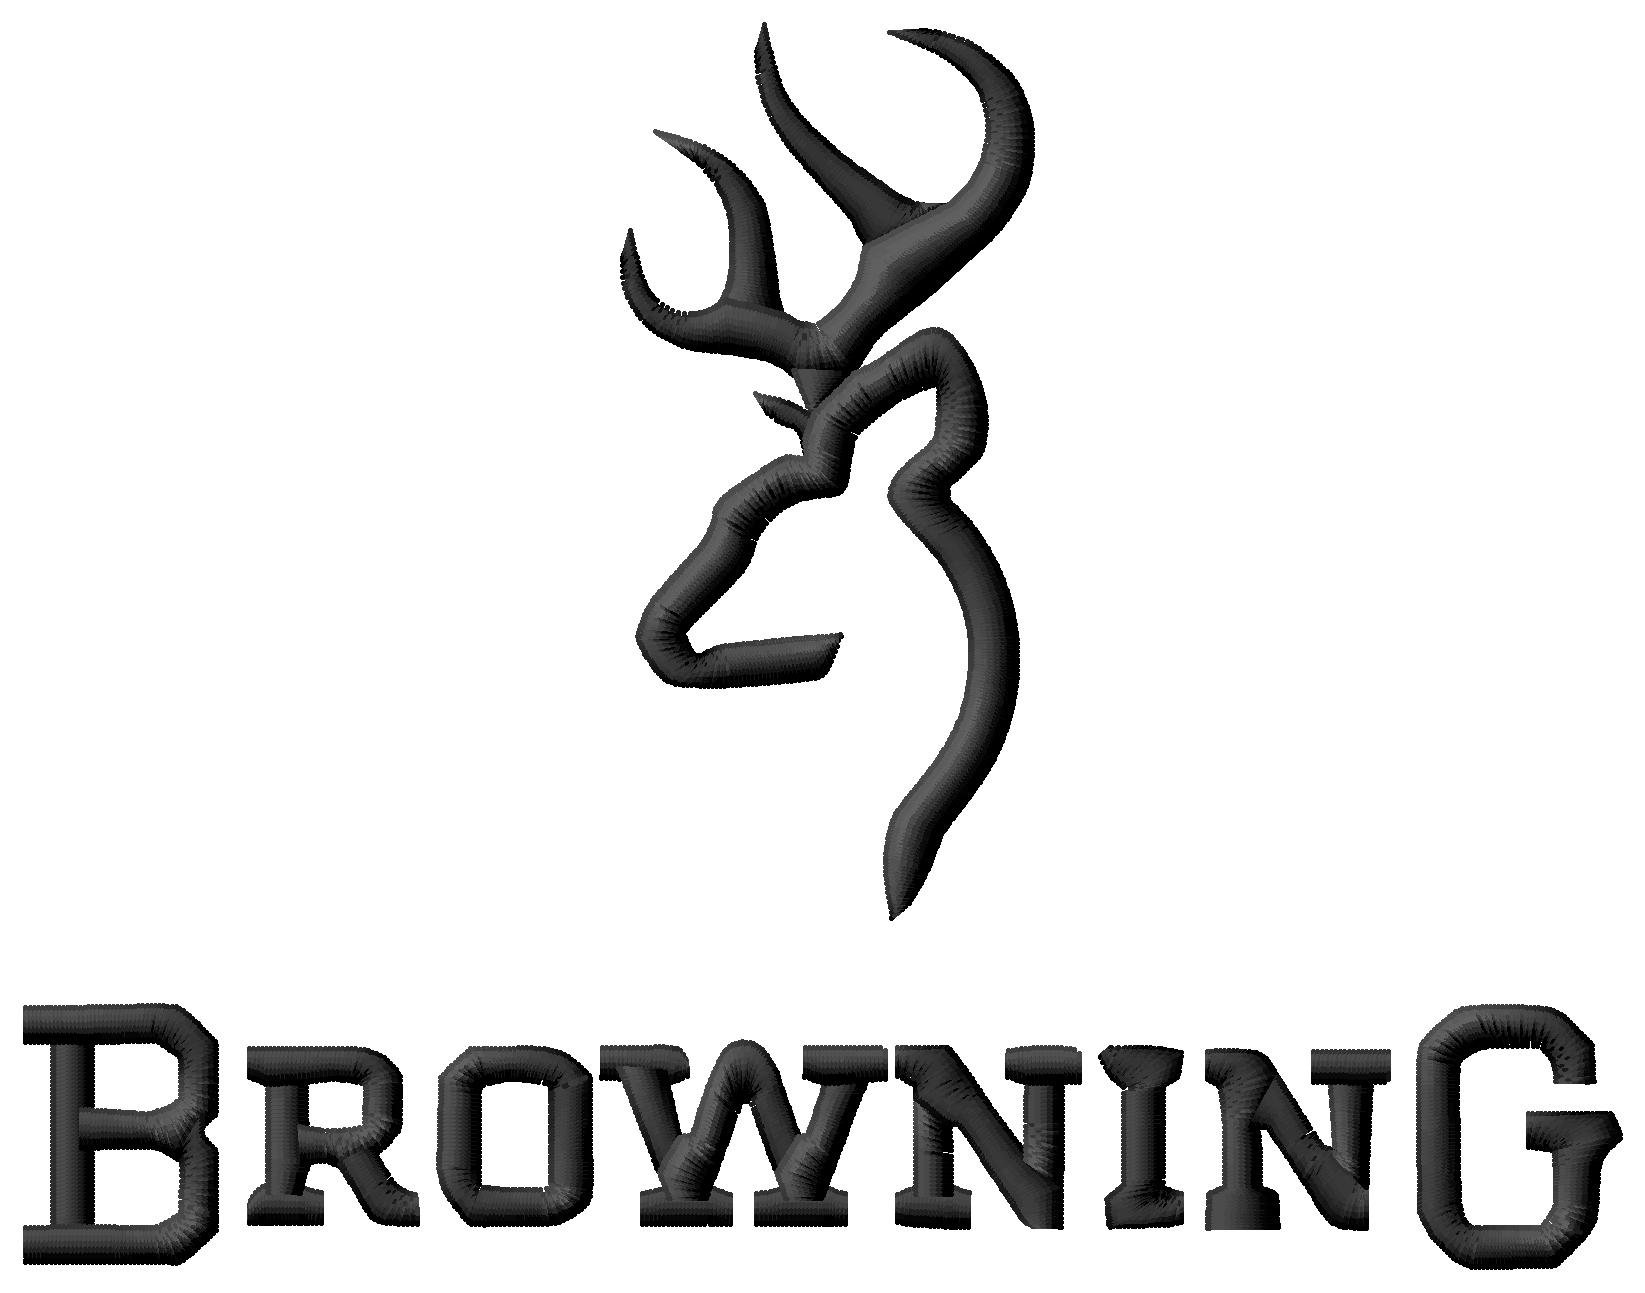 Browning Logo Wallpaper Browning logo embroidery 1645x1293